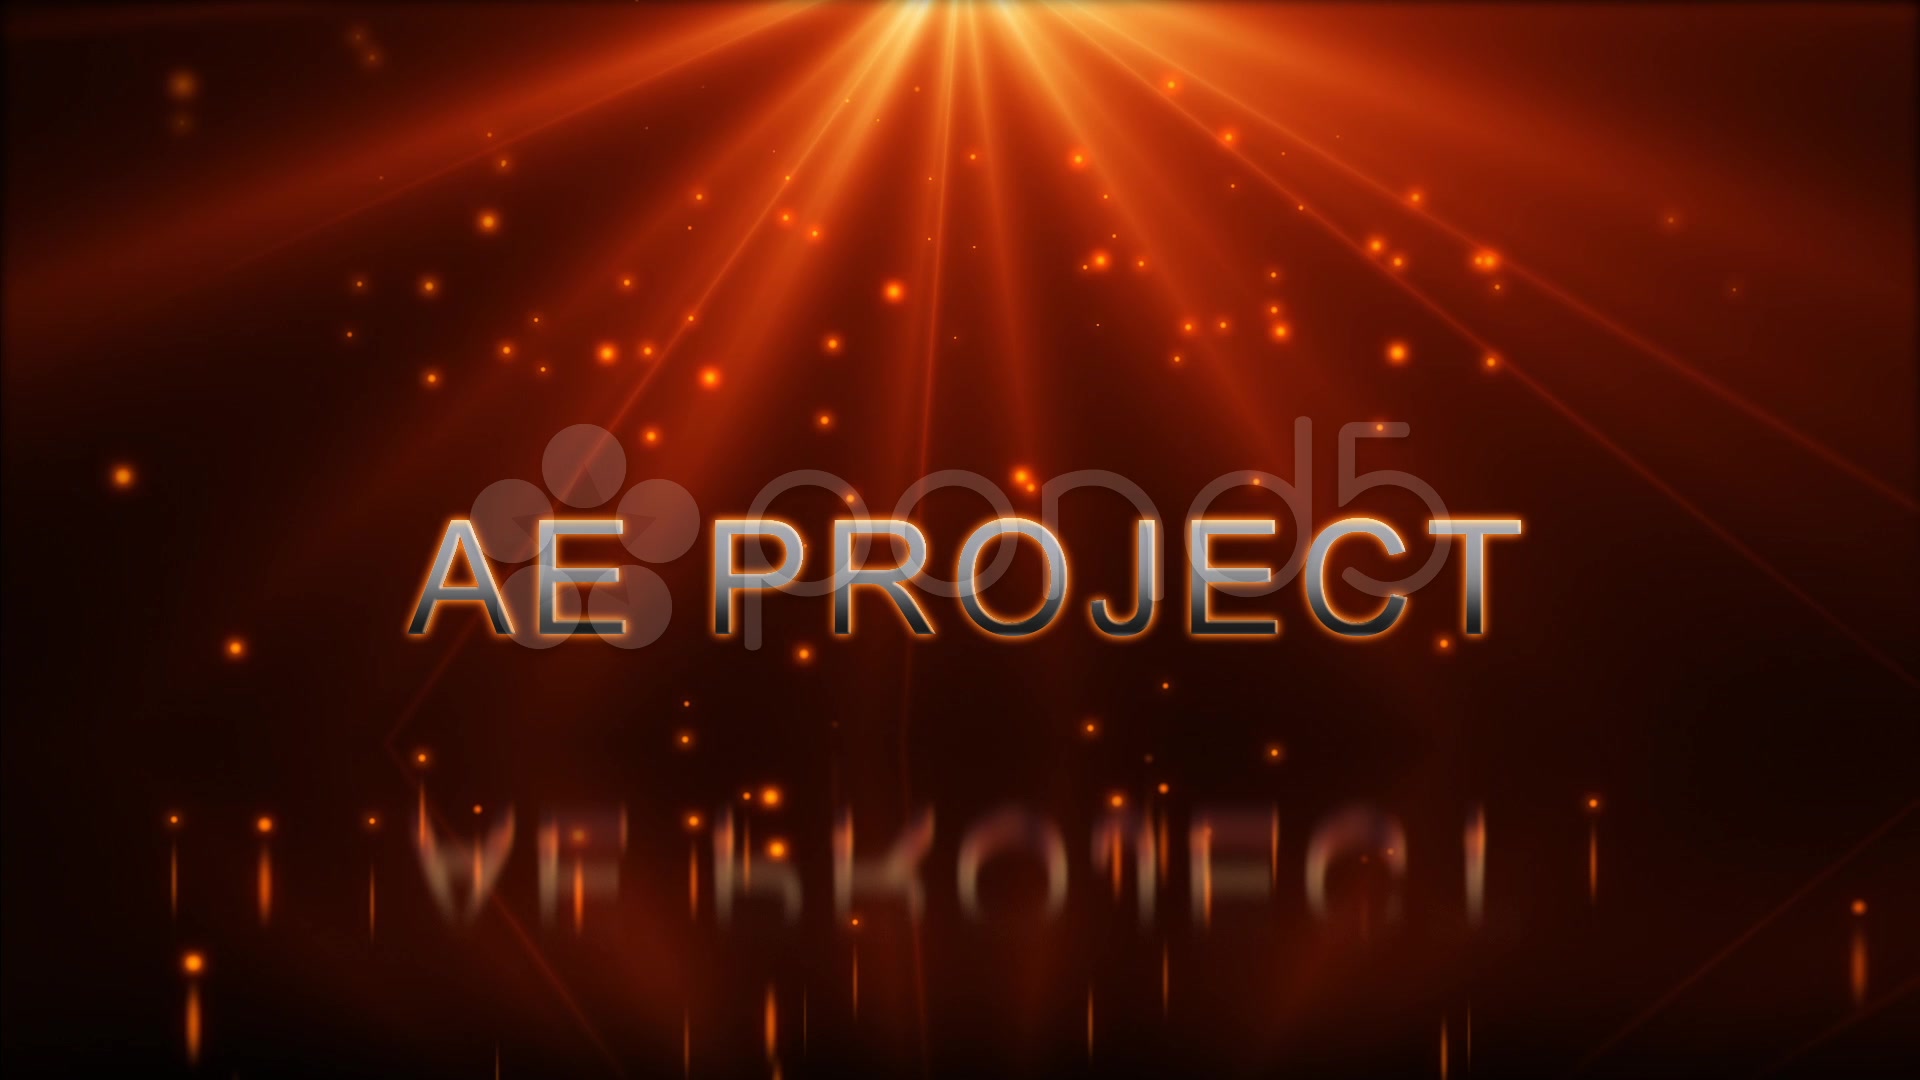 After Effects Project - Pond5 Backlight Video Presentation 941872